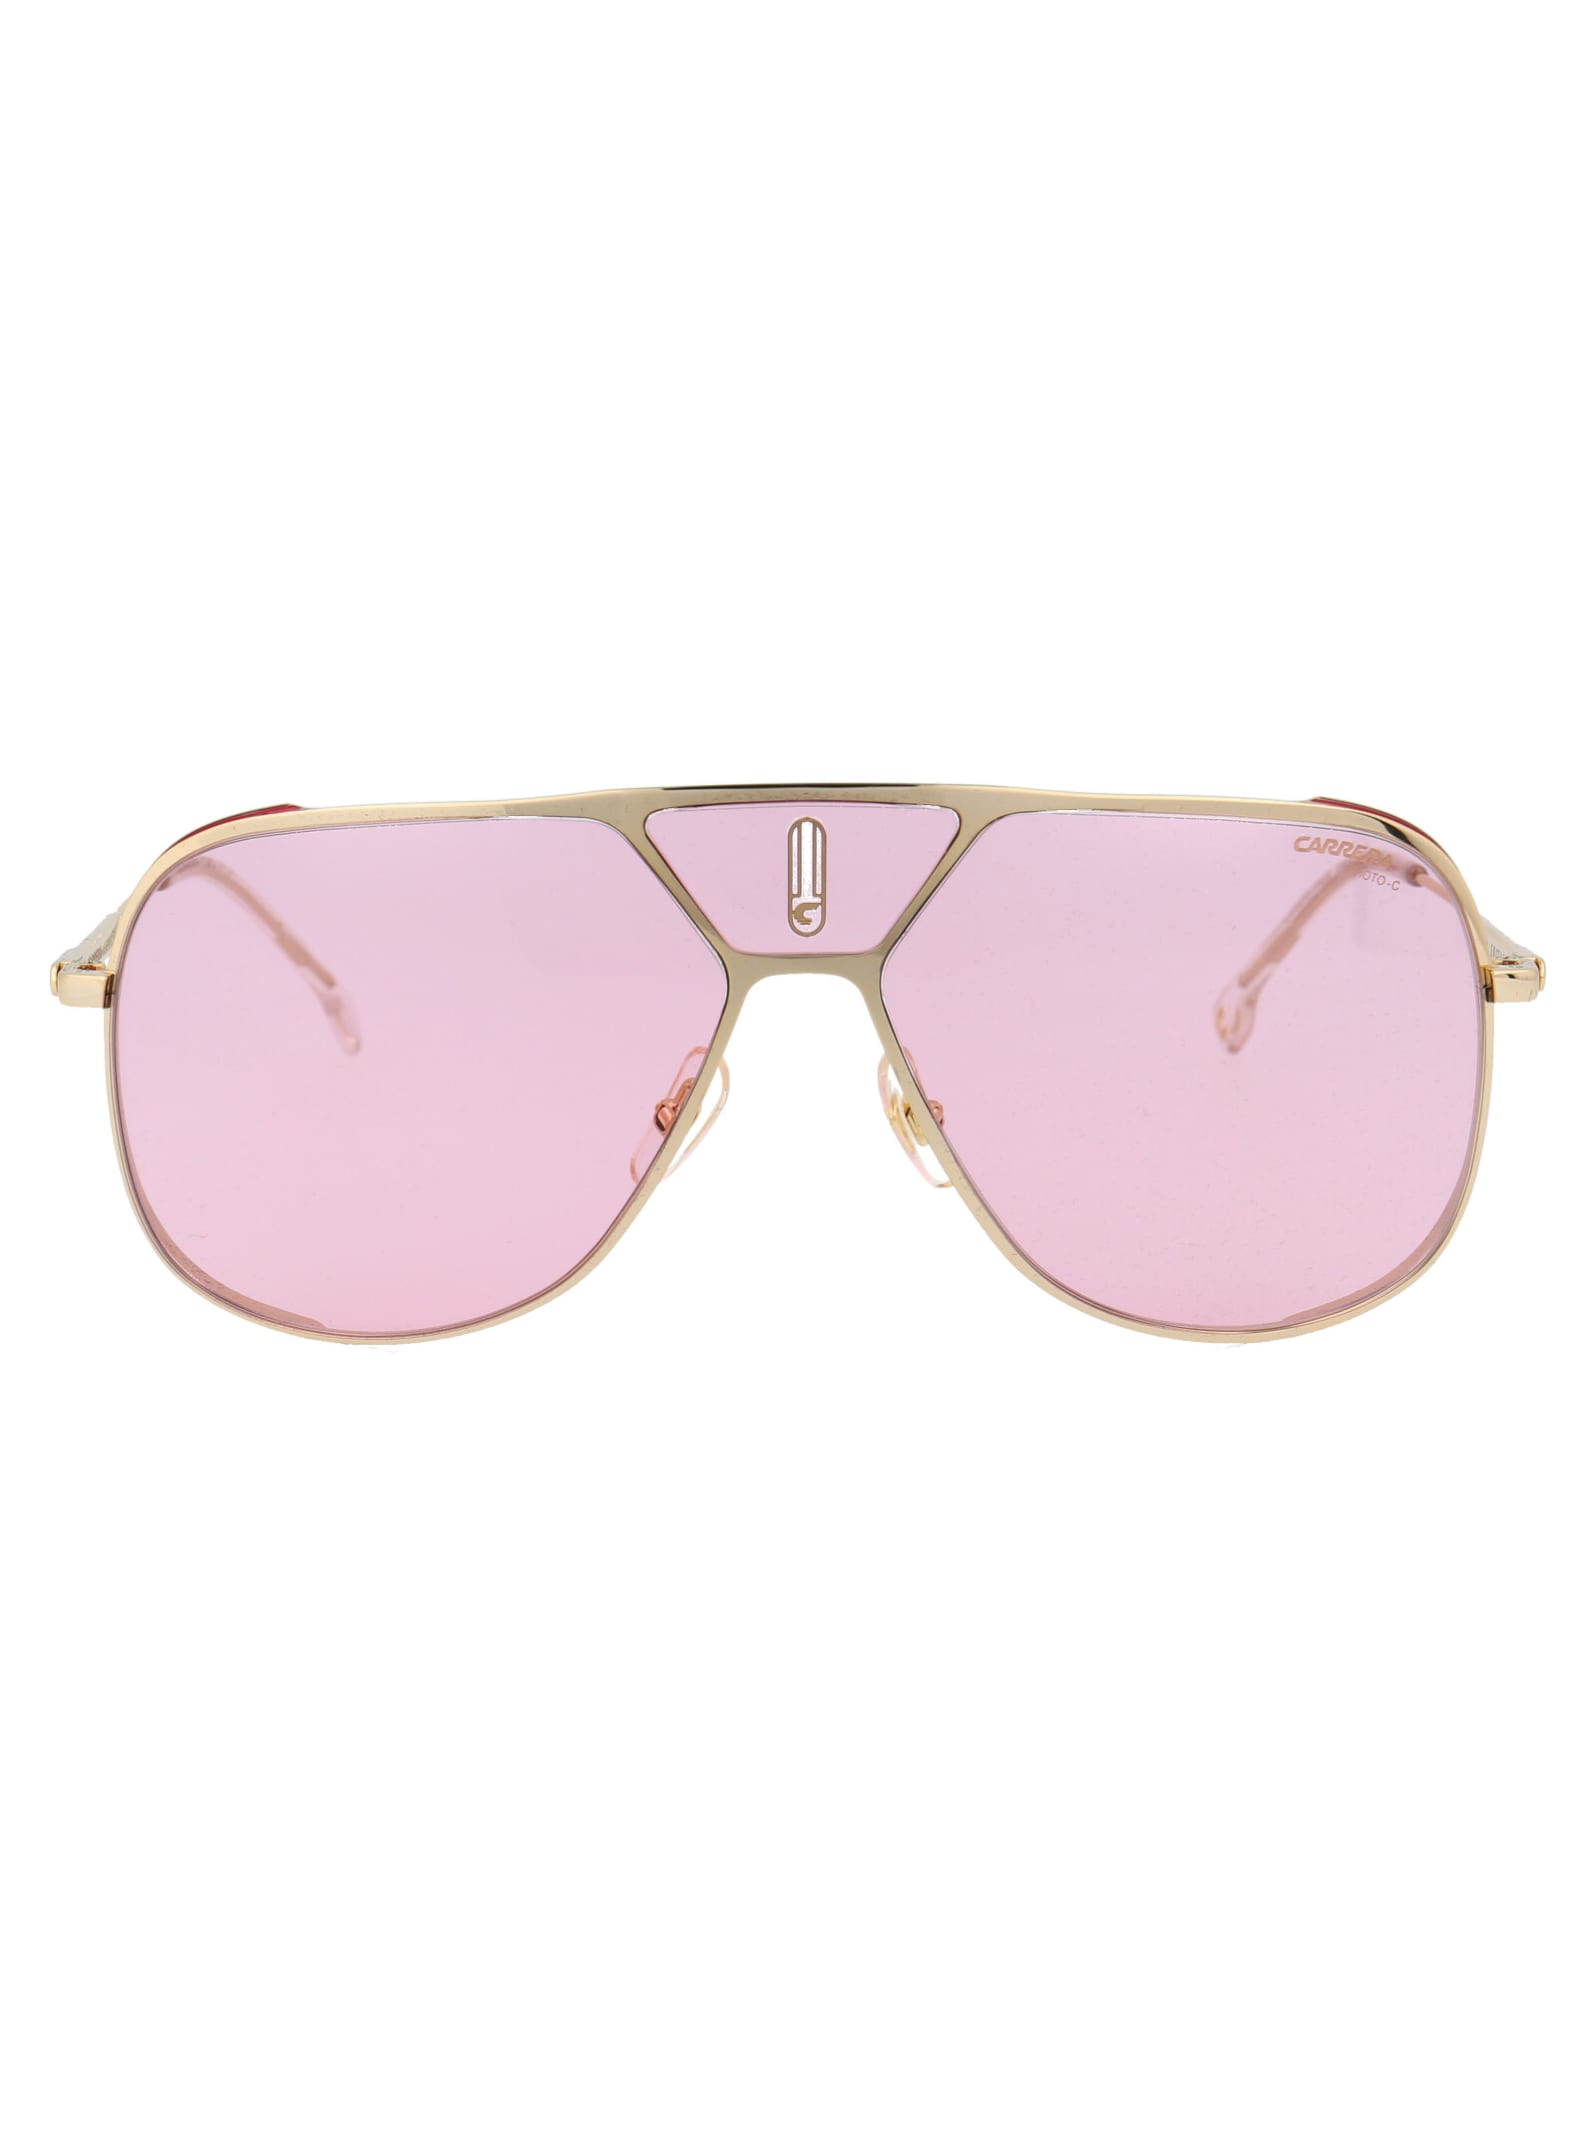 Carrera Lens3s Sunglasses In Eyrq4 Gold Pink